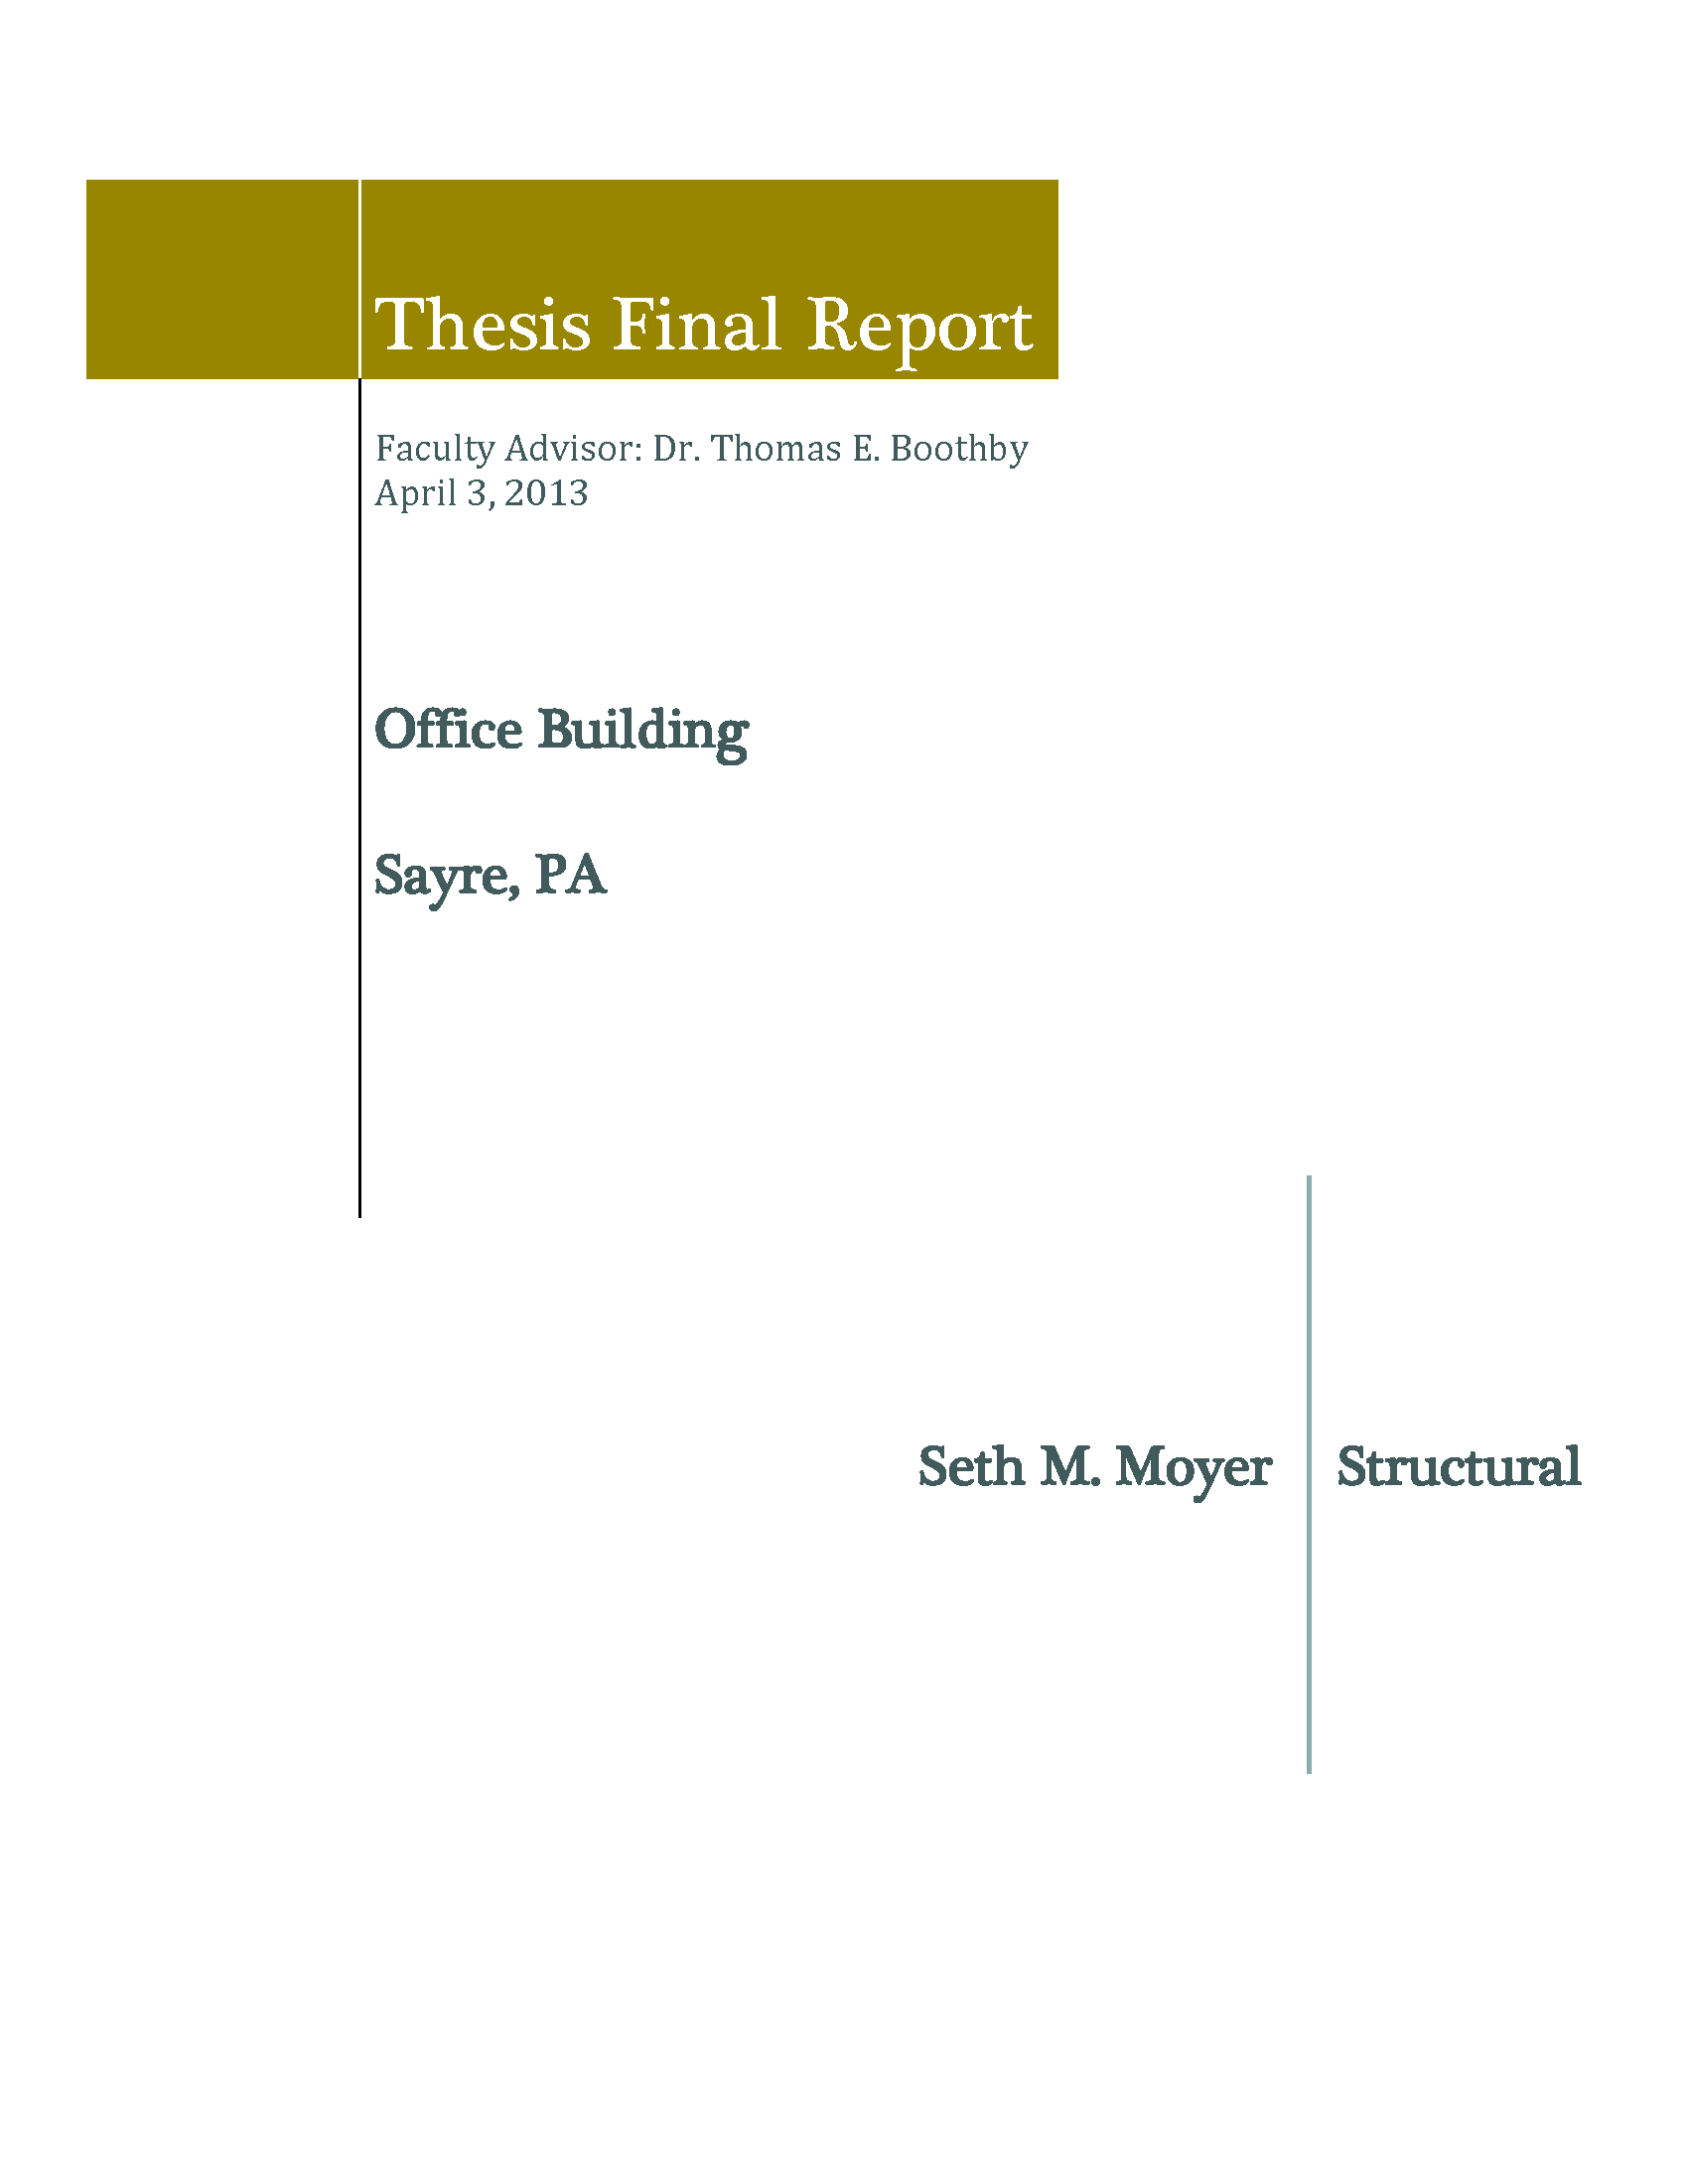 Thesis Final Report - Title Page